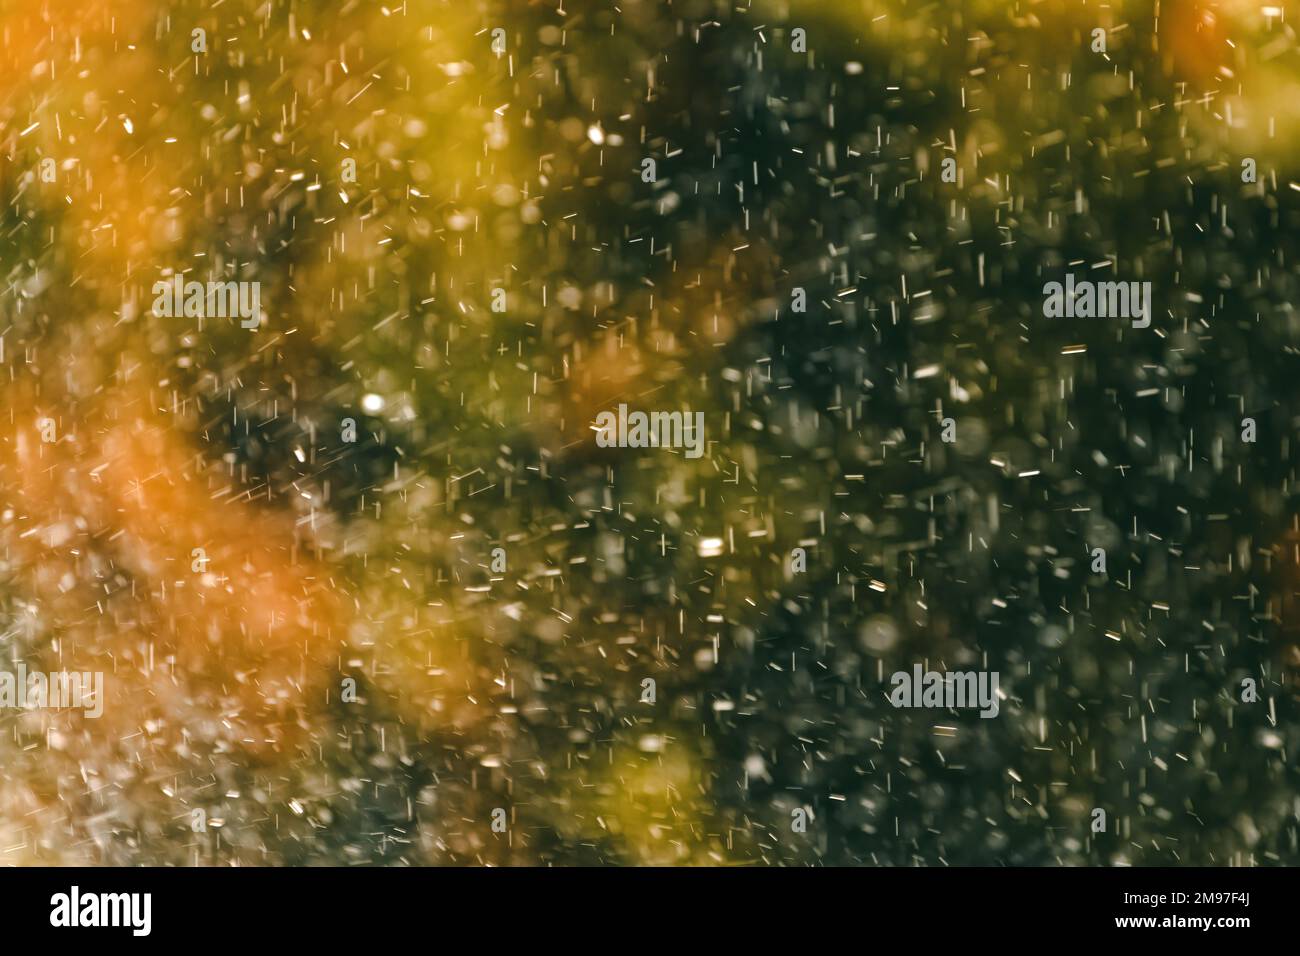 Raindrops during summer shower rain as abstract background, selective focus Stock Photo